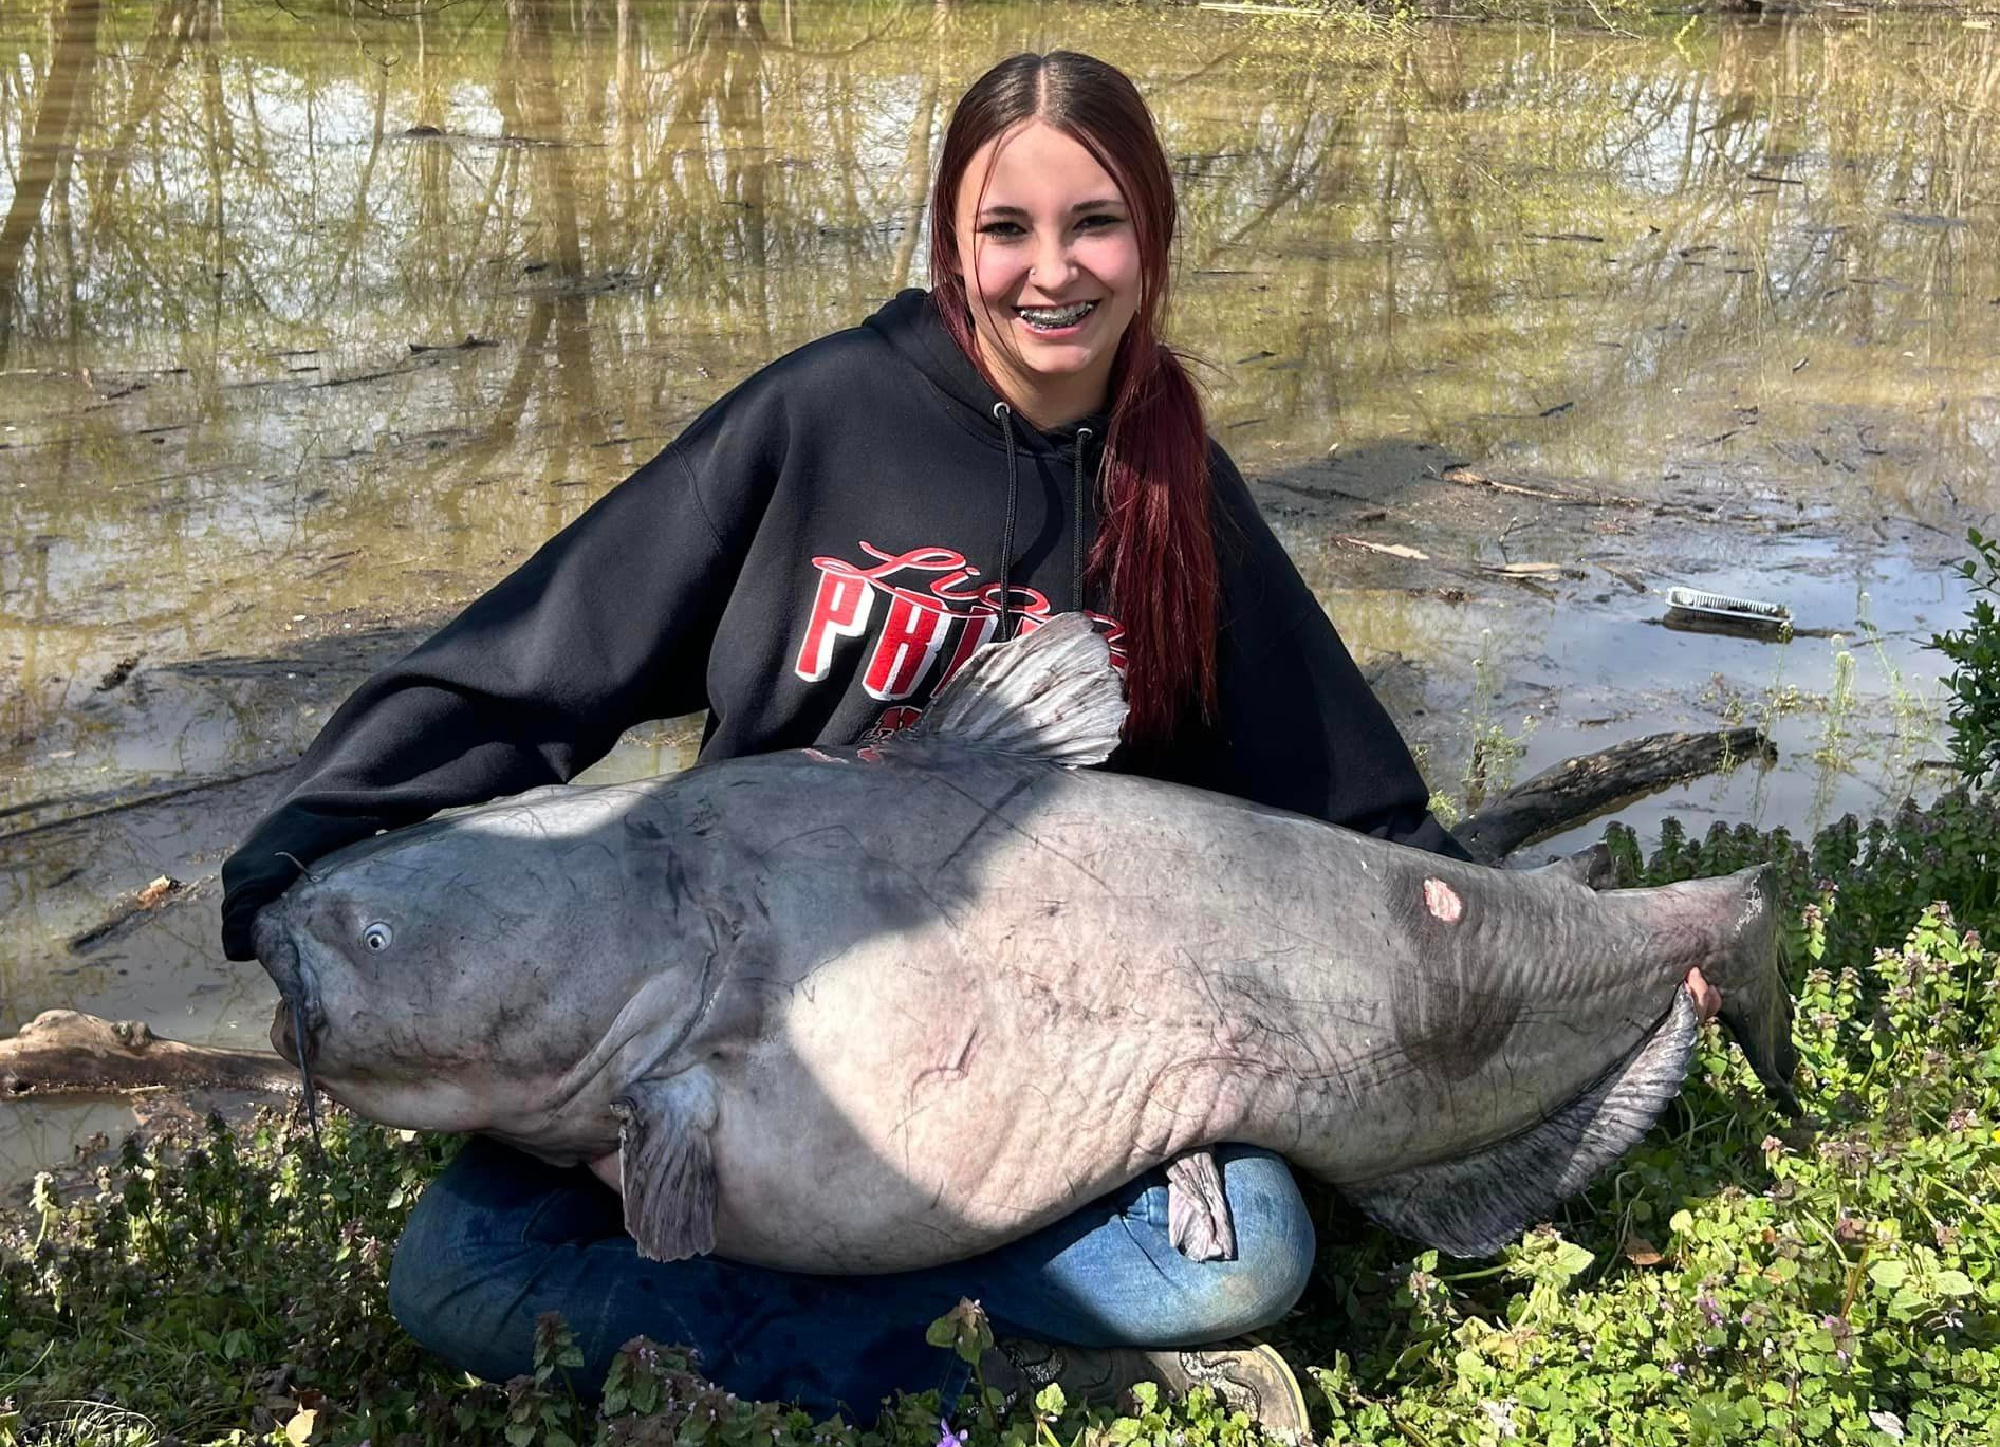 Giant, 888-Pound Tuna Is the Largest Ever Caught off Florida Coast